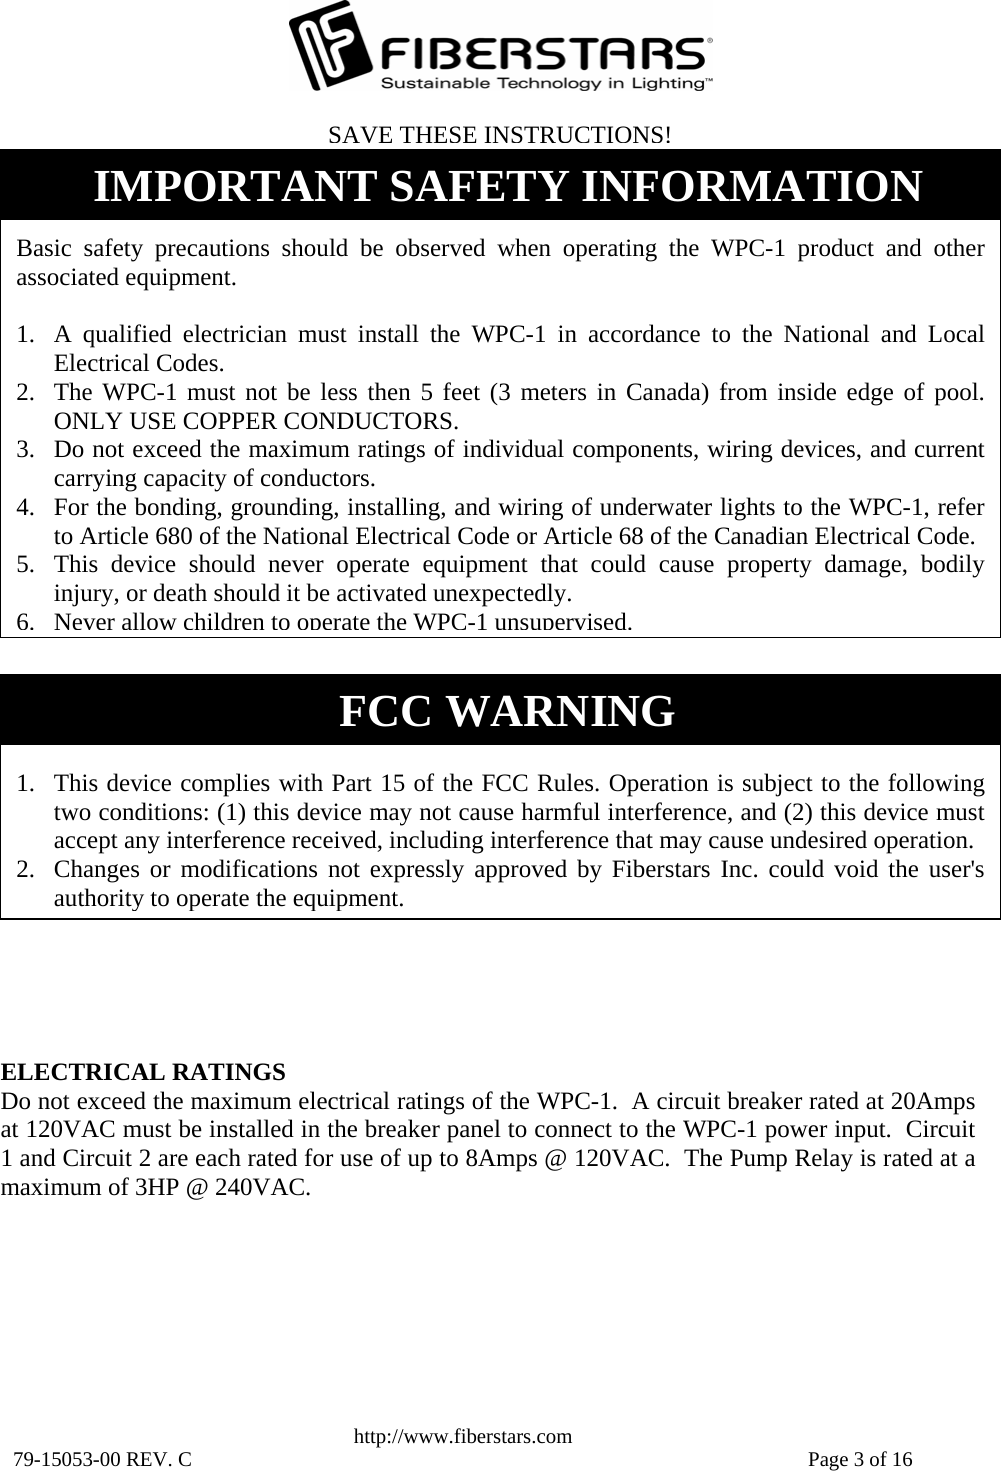   http://www.fiberstars.com 79-15053-00 REV. C    Page 3 of 16  1. This device complies with Part 15 of the FCC Rules. Operation is subject to the following two conditions: (1) this device may not cause harmful interference, and (2) this device must accept any interference received, including interference that may cause undesired operation. 2. Changes or modifications not expressly approved by Fiberstars Inc. could void the user&apos;s authority to operate the equipment.FCC WARNING ELECTRICAL RATINGS Do not exceed the maximum electrical ratings of the WPC-1.  A circuit breaker rated at 20Amps at 120VAC must be installed in the breaker panel to connect to the WPC-1 power input.  Circuit 1 and Circuit 2 are each rated for use of up to 8Amps @ 120VAC.  The Pump Relay is rated at amaximum of 3HP @ 240VAC.  Basic safety precautions should be observed when operating the WPC-1 product and other associated equipment.  1. A qualified electrician must install the WPC-1 in accordance to the National and Local Electrical Codes. 2. The WPC-1 must not be less then 5 feet (3 meters in Canada) from inside edge of pool.  ONLY USE COPPER CONDUCTORS. 3. Do not exceed the maximum ratings of individual components, wiring devices, and current carrying capacity of conductors. 4. For the bonding, grounding, installing, and wiring of underwater lights to the WPC-1, refer to Article 680 of the National Electrical Code or Article 68 of the Canadian Electrical Code. 5. This device should never operate equipment that could cause property damage, bodily injury, or death should it be activated unexpectedly. 6.Never allow children to operate the WPC-1 unsupervised.SAVE THESE INSTRUCTIONS!IMPORTANT SAFETY INFORMATION 